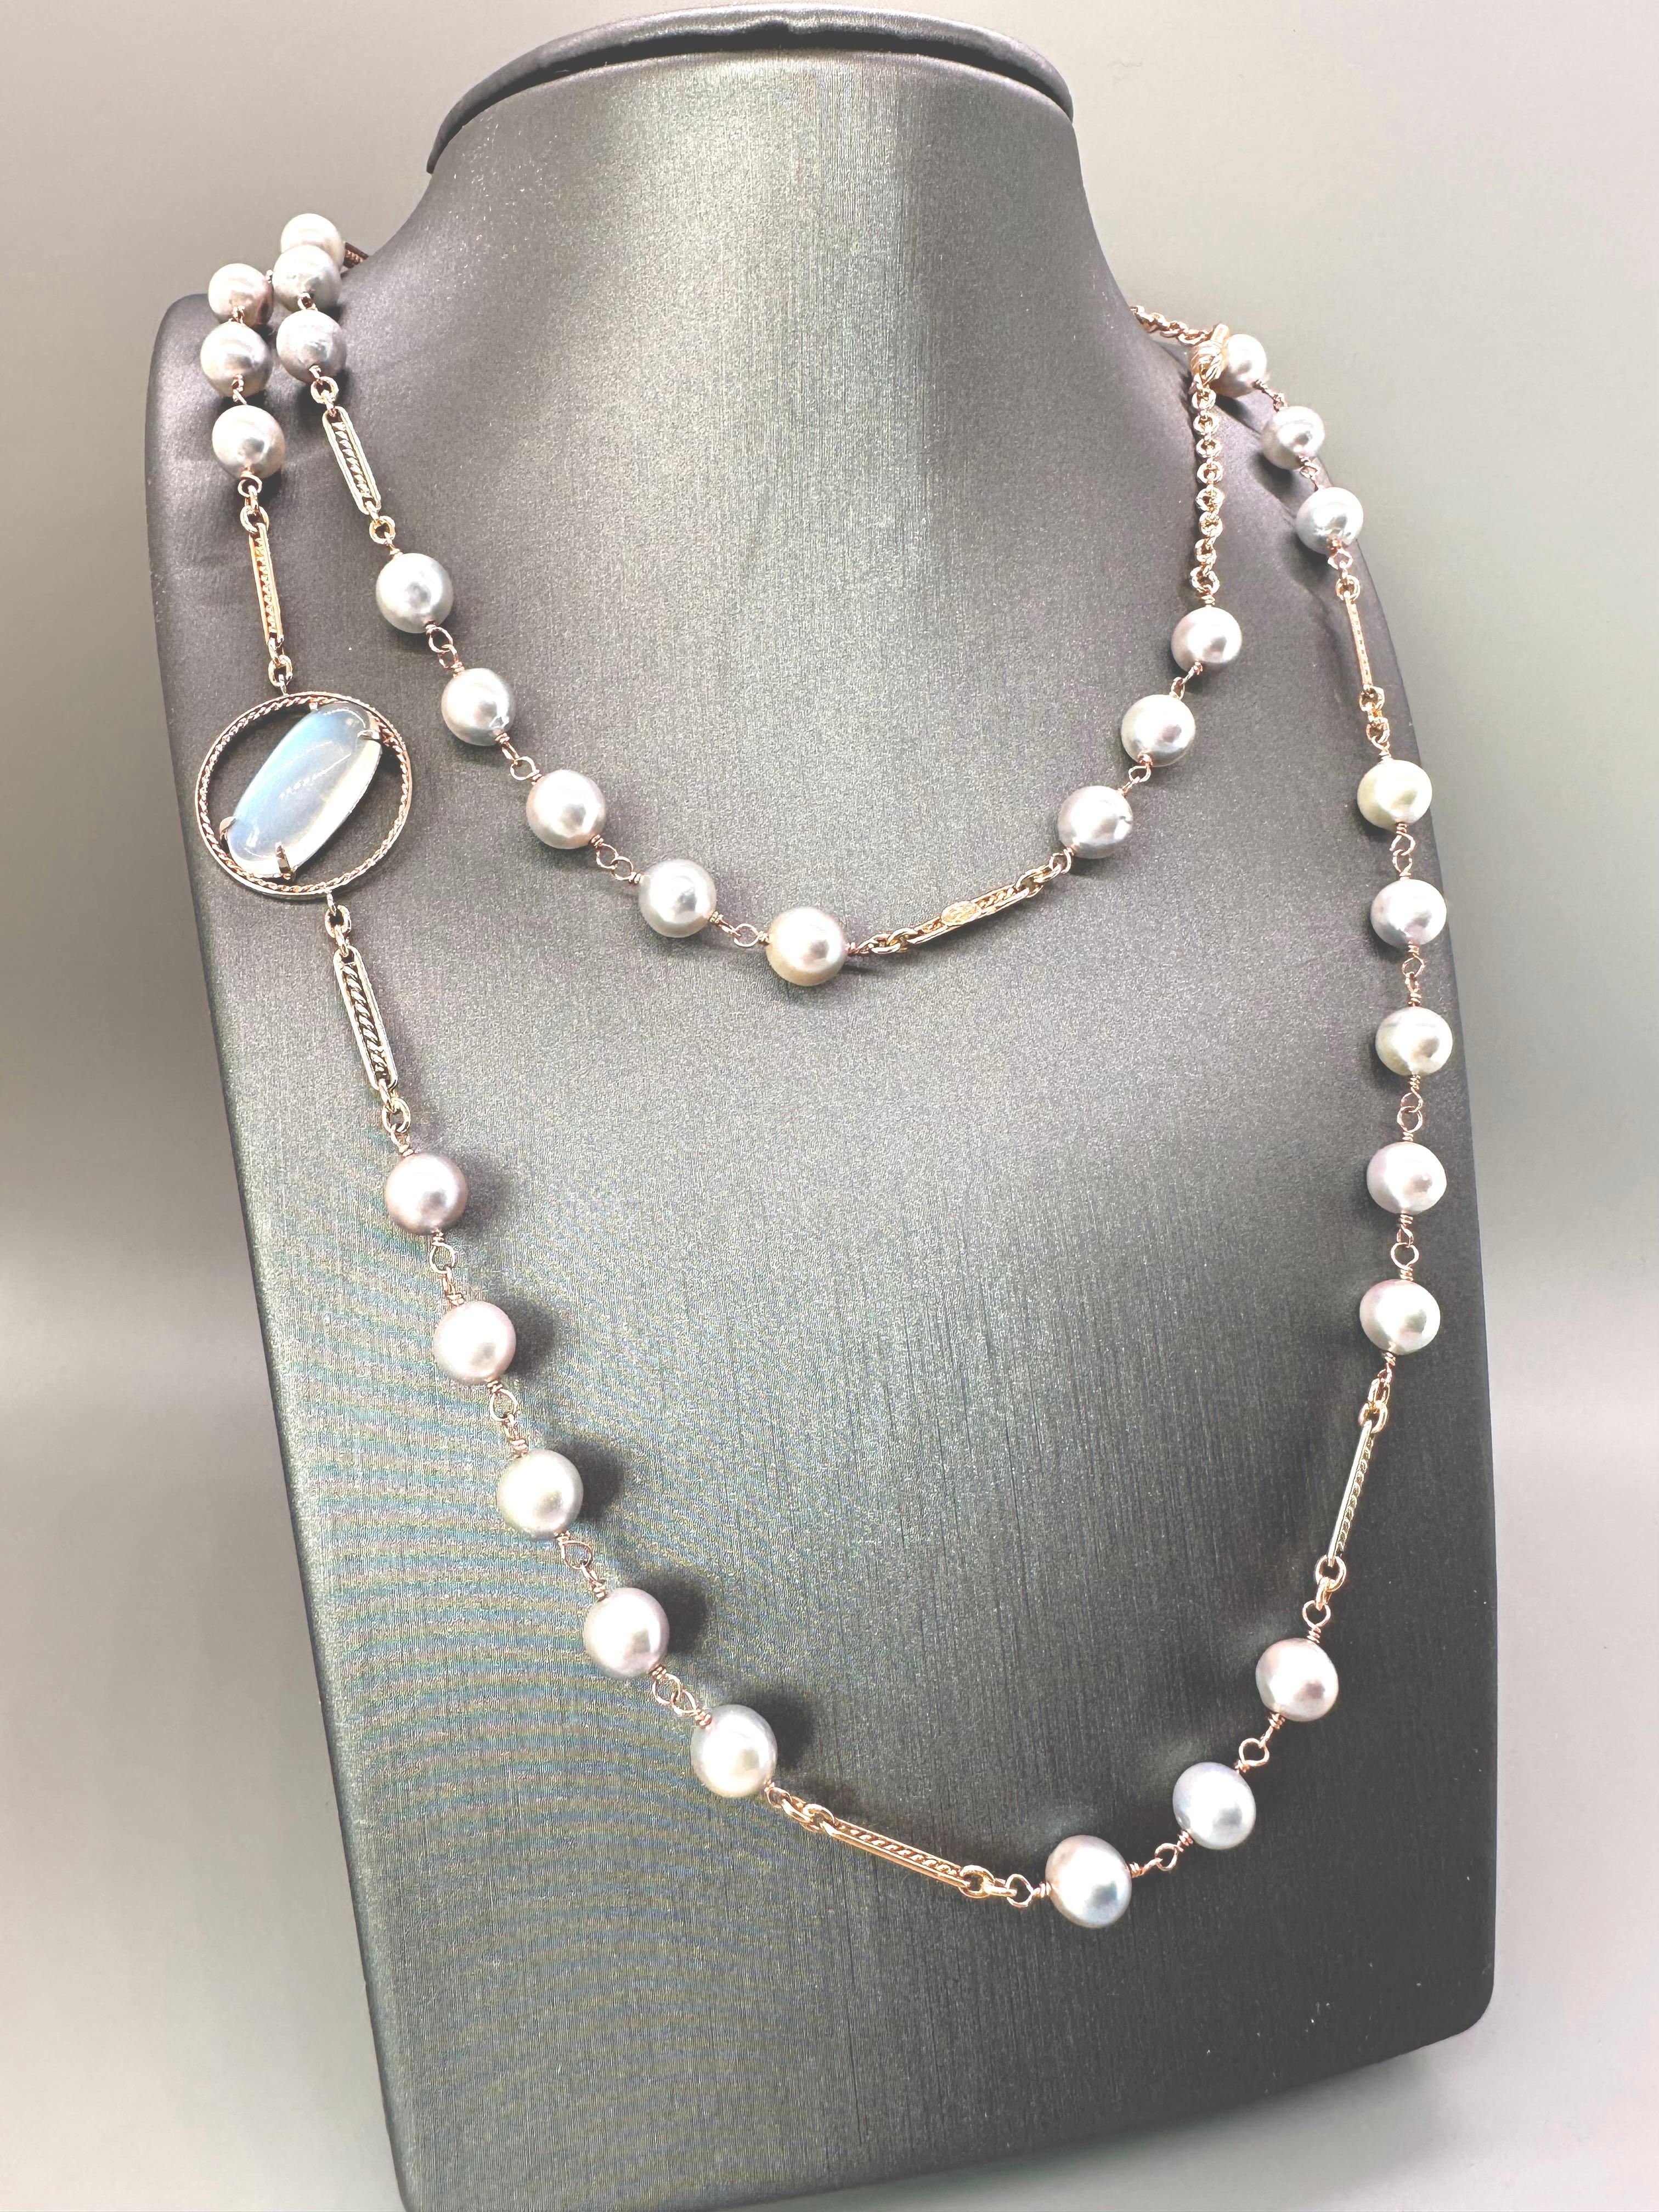 6.61 carat blue moonstone, Akoya pearls on a handmade 14k necklace by G&G Studio For Sale 7